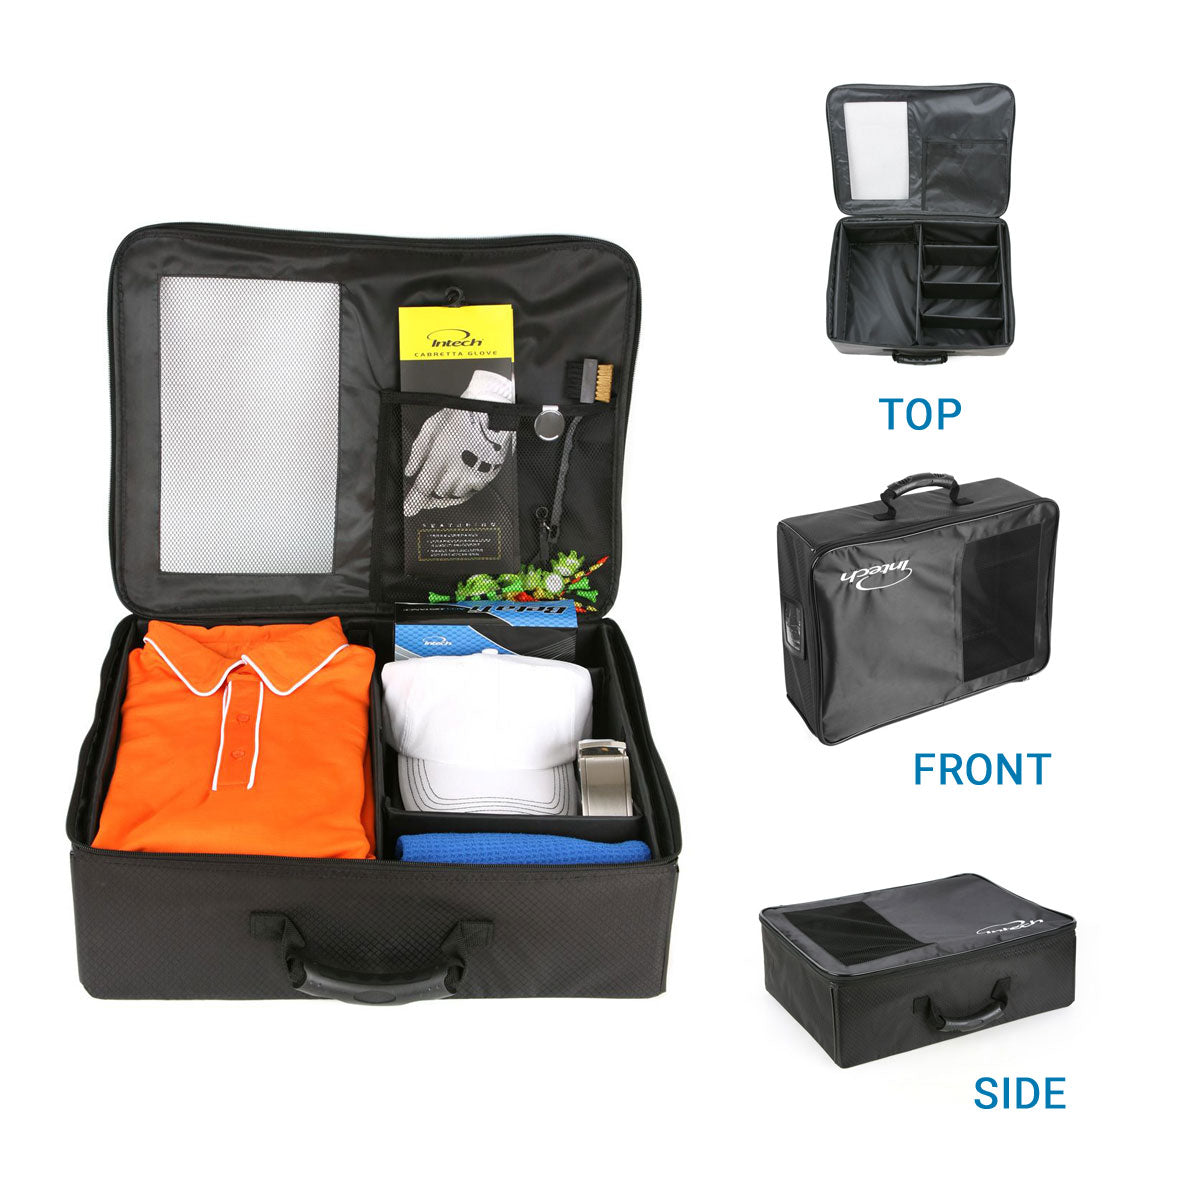 left, an Intech Single Row Golf Trunk Organizer with golf apparel and acccesories inside, to the right shows the top, front and side views